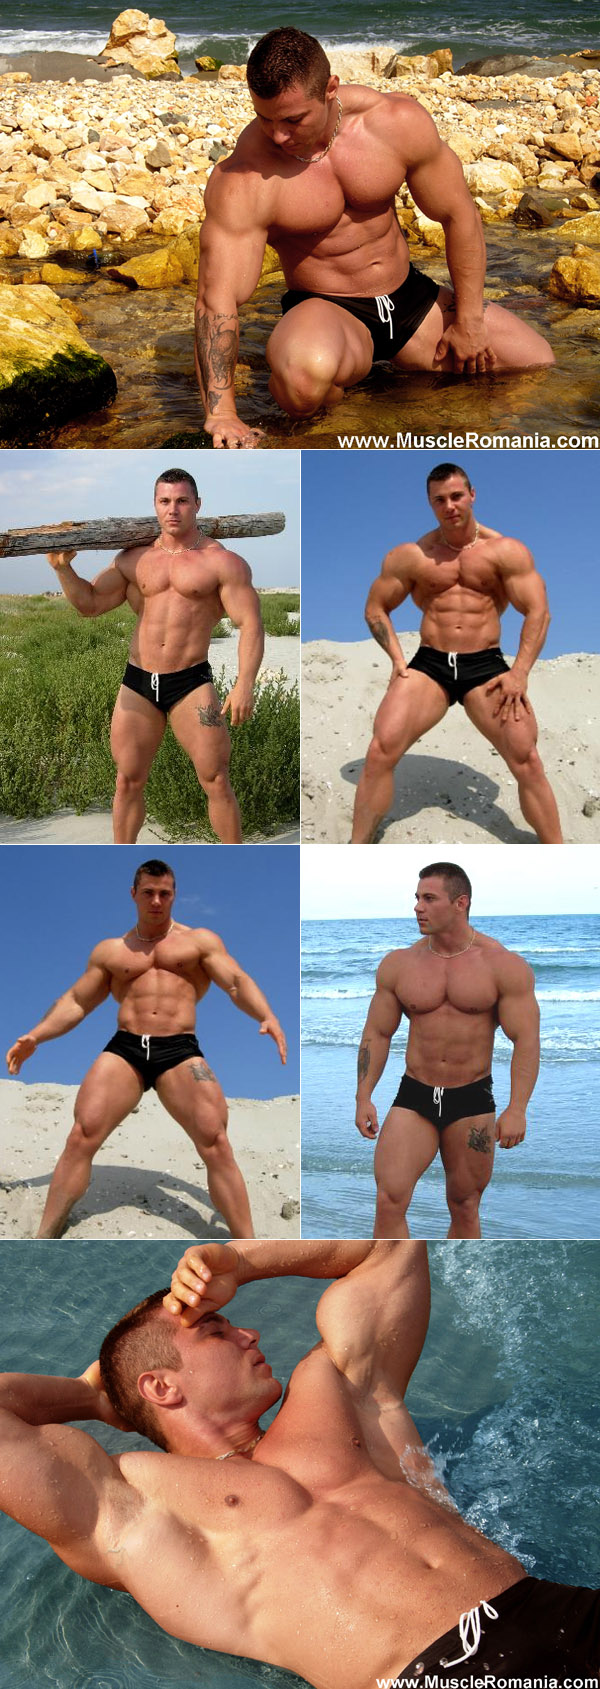 Muscle man at the beach